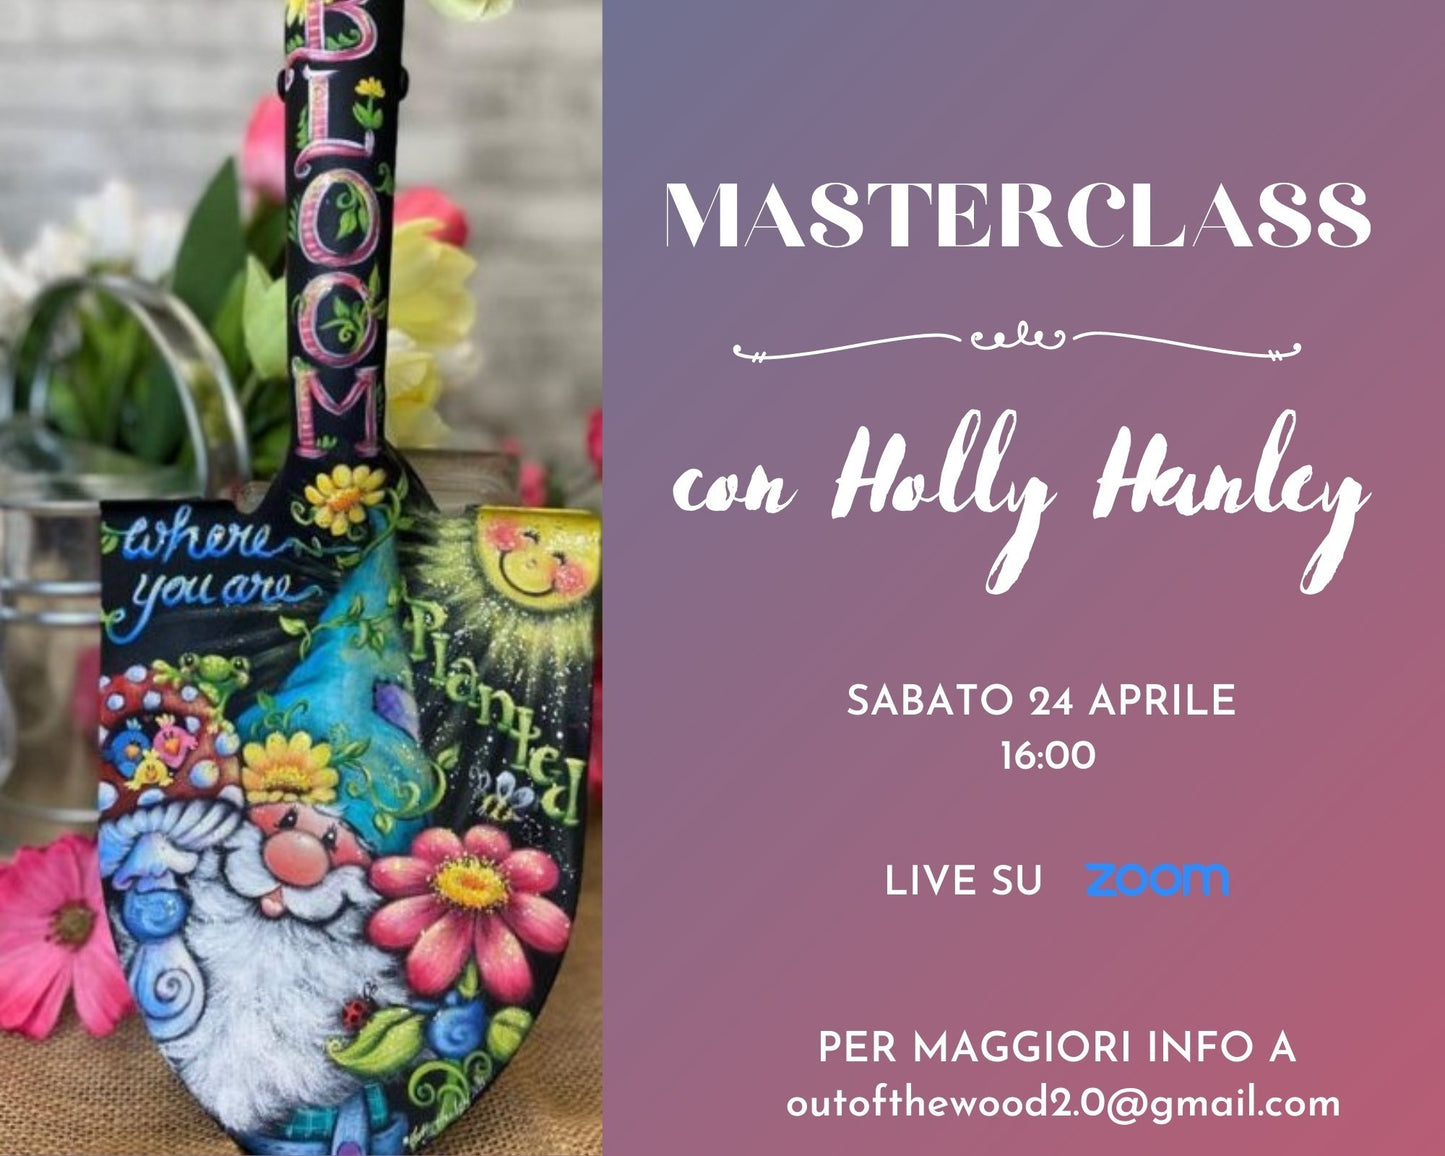 MASTERCLASS IN DIRETTA LIVE   CON HOLLY HANLEY - Out of the Wood